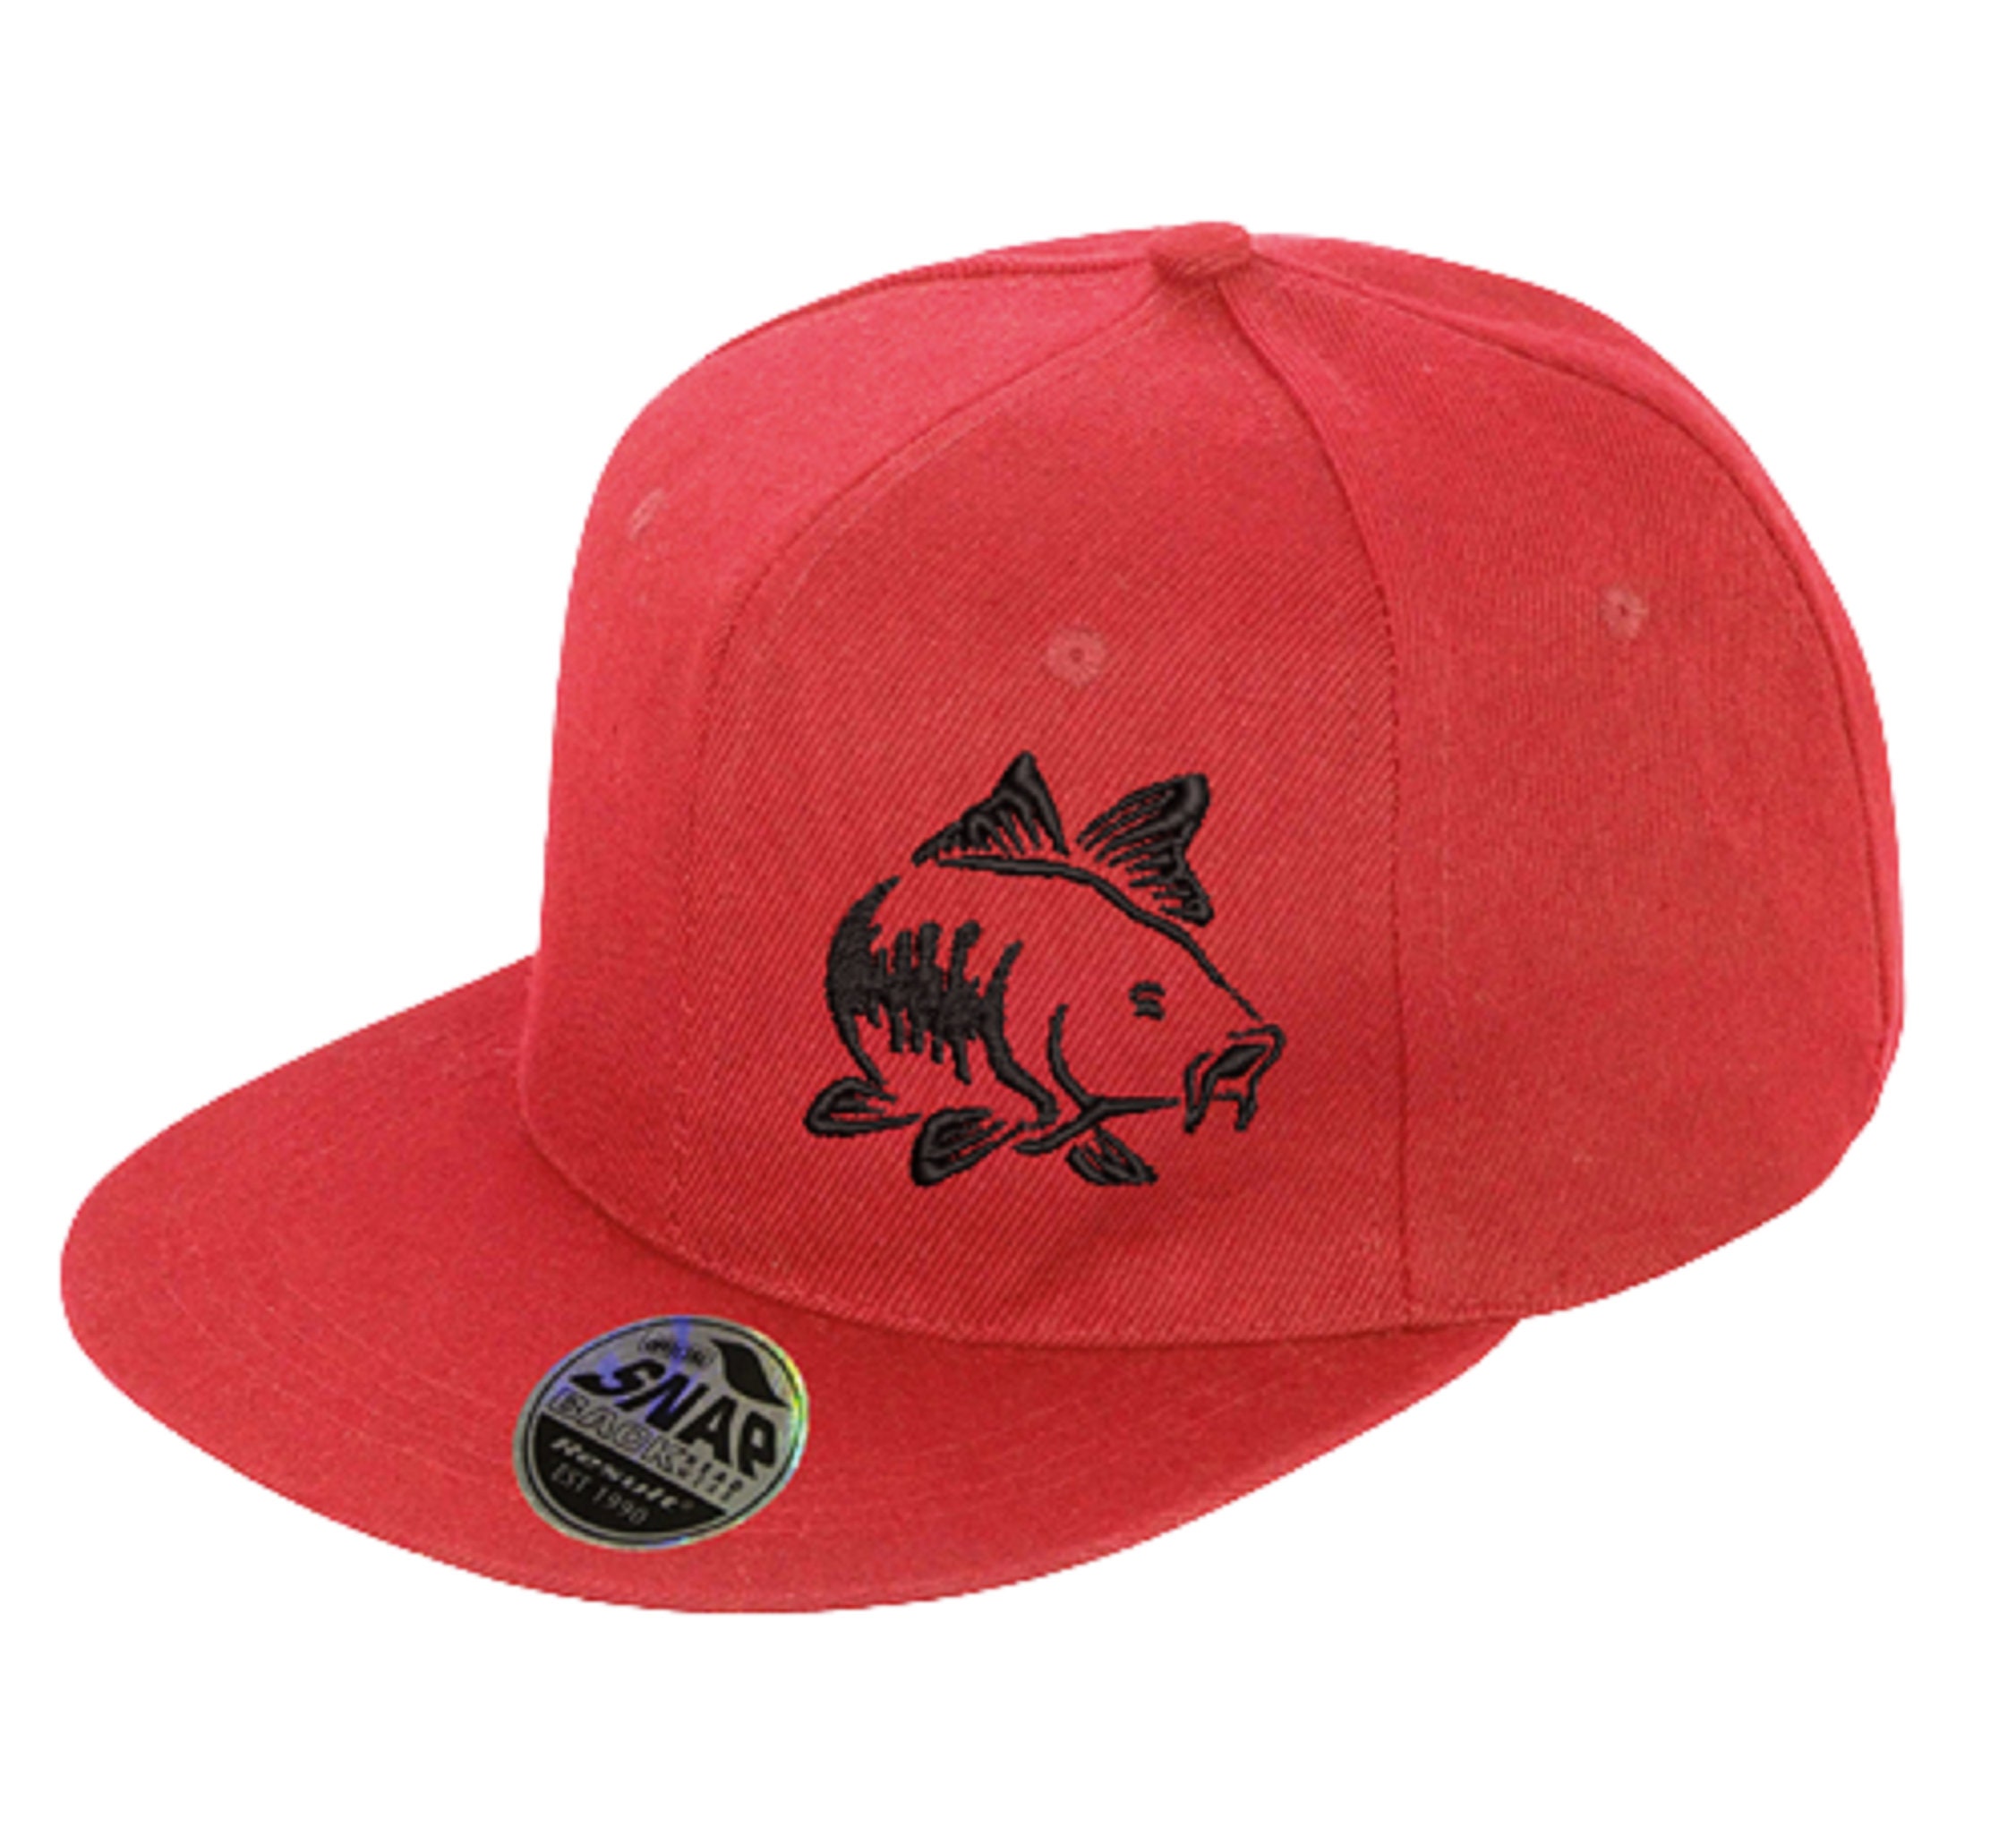 Personalised Carp Snap Back Cap in 3 Cap Colours and 25 Thread Colours  Plain Adults Unisex Caps Hats Text/logo -  UK